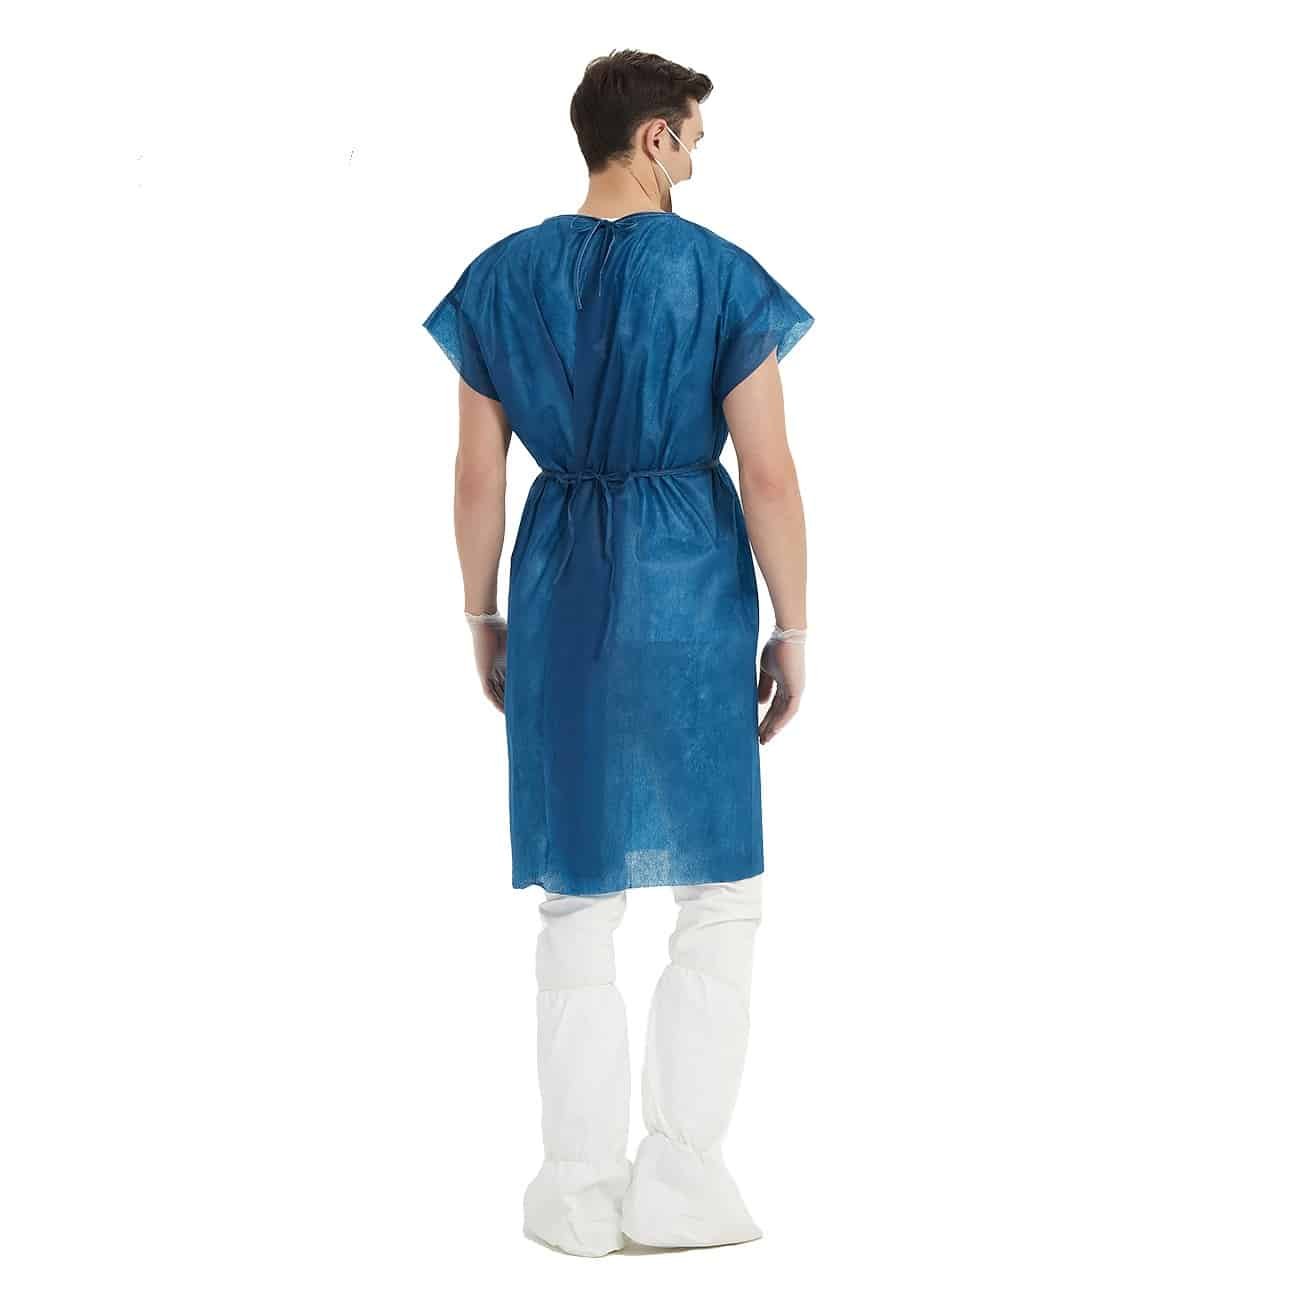 China Surgical Gown Suppliers, Manufacturers, Factory - Cheap Surgical Gown  in Stock - JUNLONG